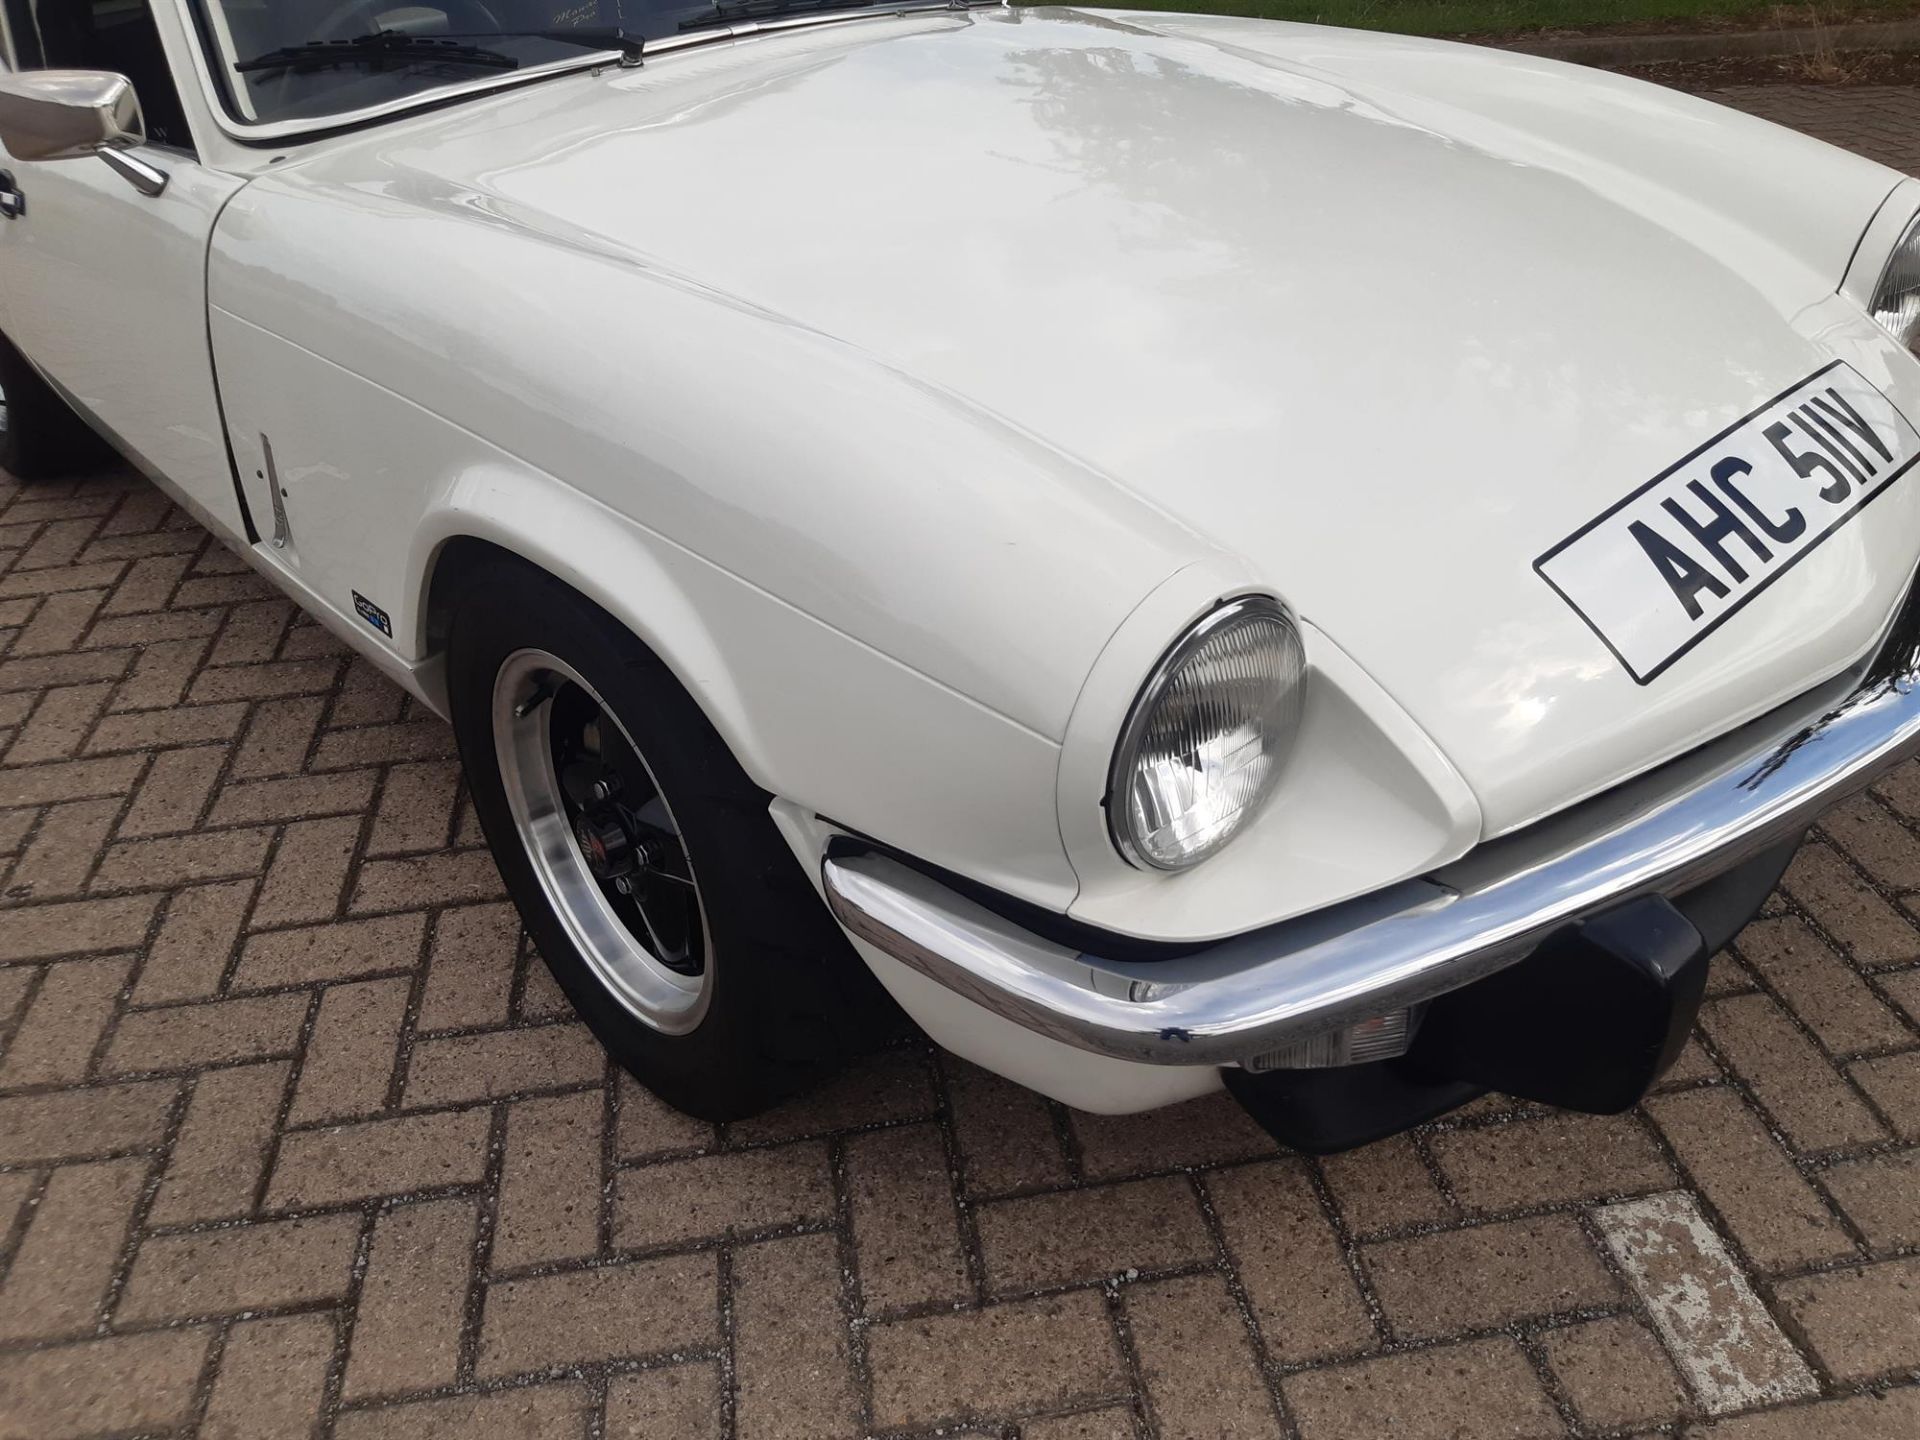 1980 Triumph Spitfire 1500 Fast Road Comvertible with Hardtop - Image 6 of 10